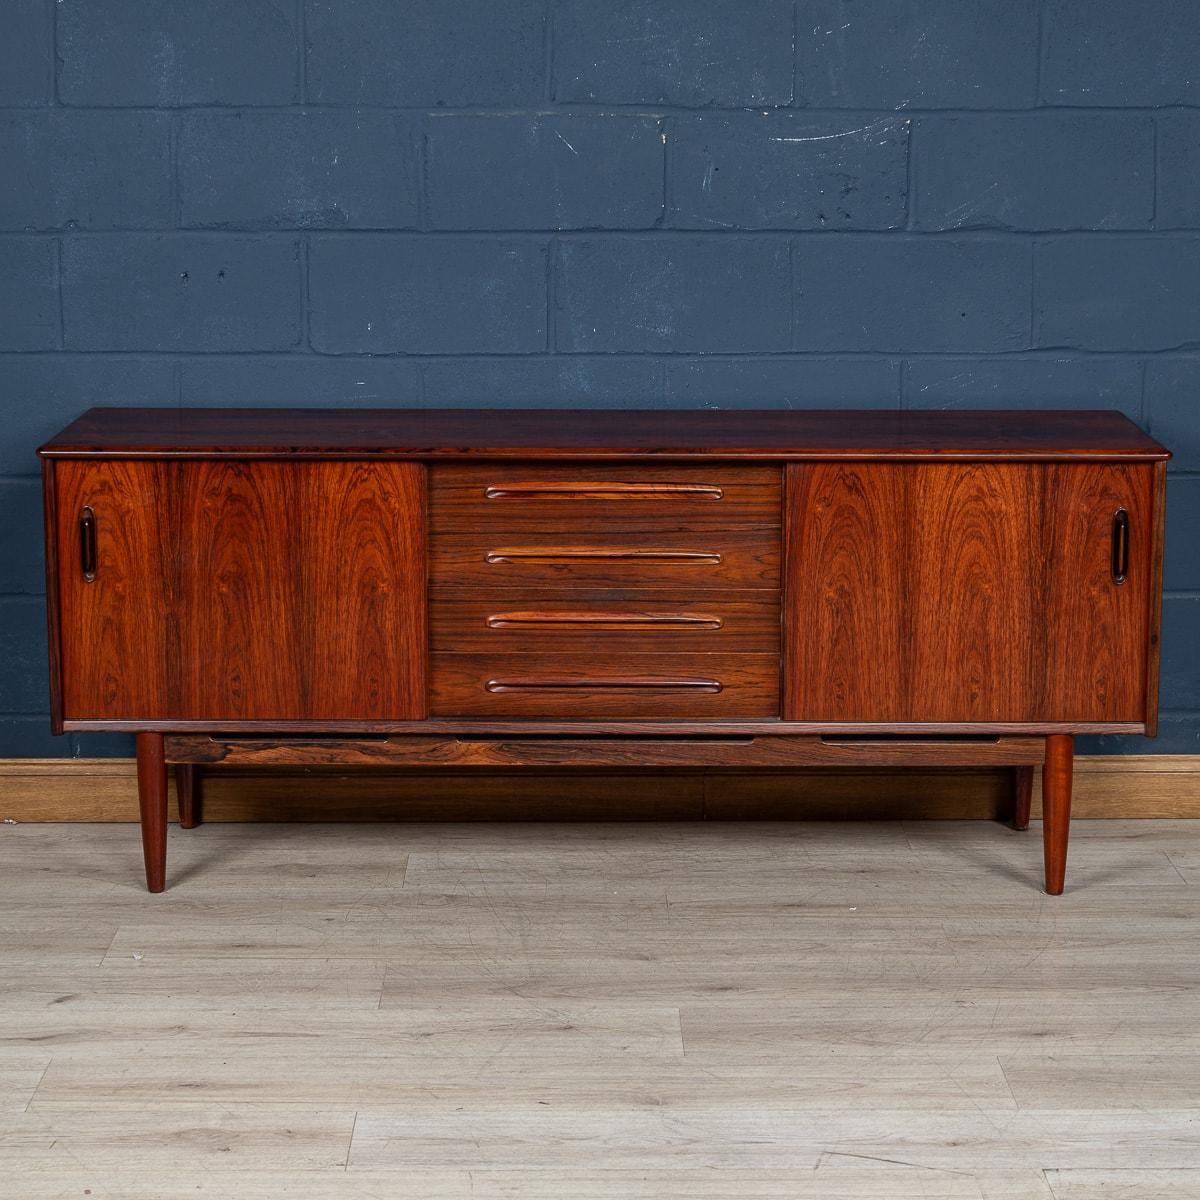 A rare vintage Swedish rosewood sideboard designed by the talented Nils Jonsson for Troeds in the 1960s. The 'Trento' model boasts a stunning rich exterior made from solid and veneer rosewood and features clean architectural lines, recessed handles